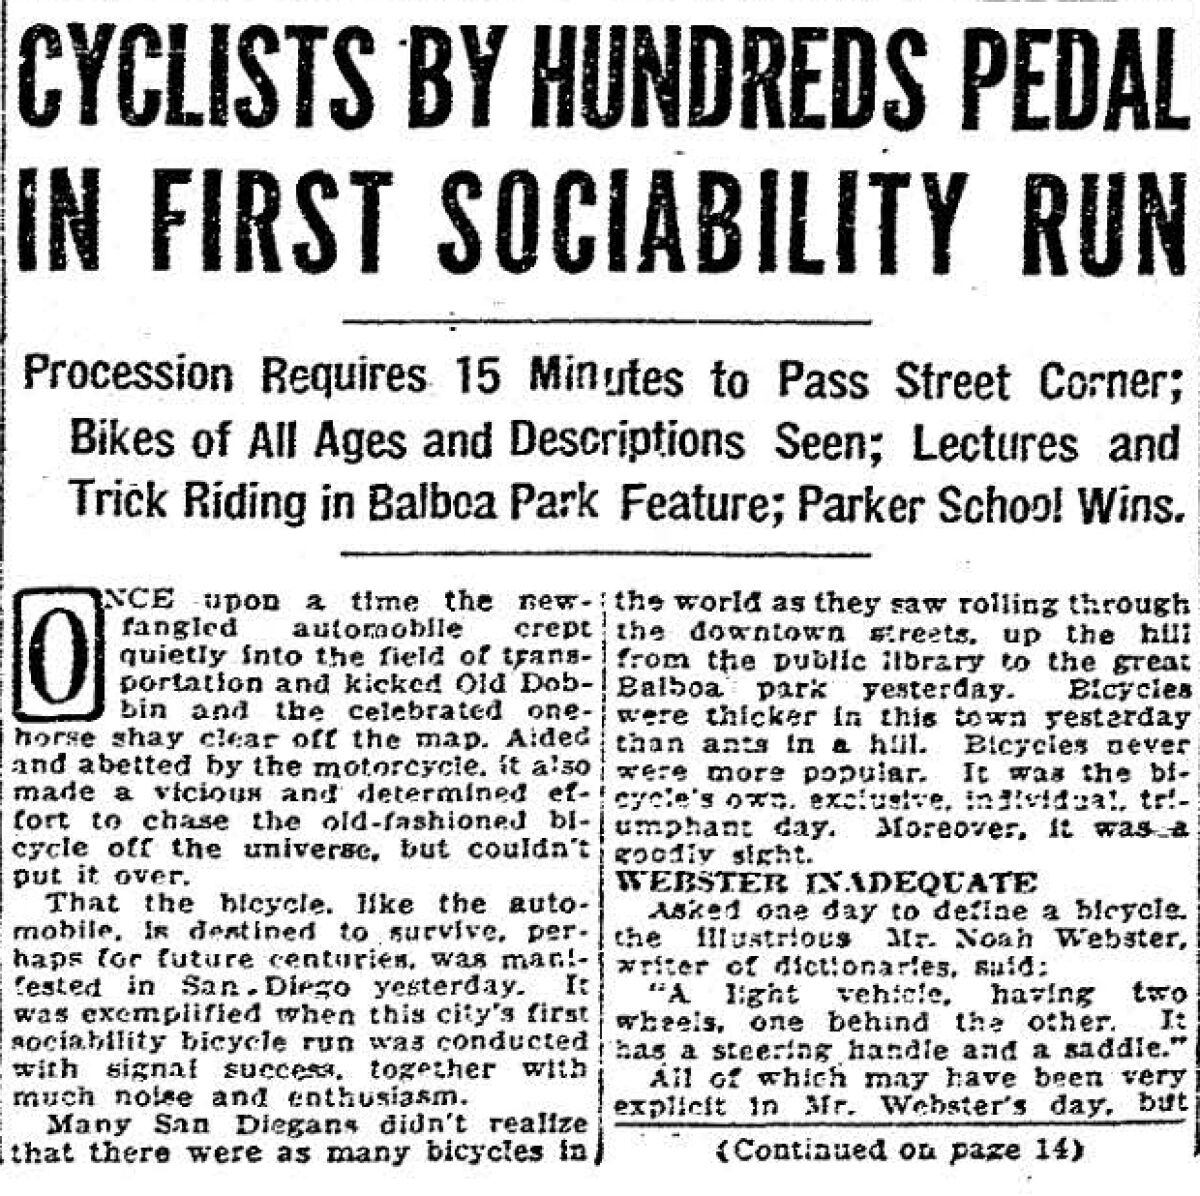 "CYCLISTS BY HUNDRES PEDAL IN FIRST SOCIABILITY RUN" from the front page of The San Diego Union, March 20,1921.